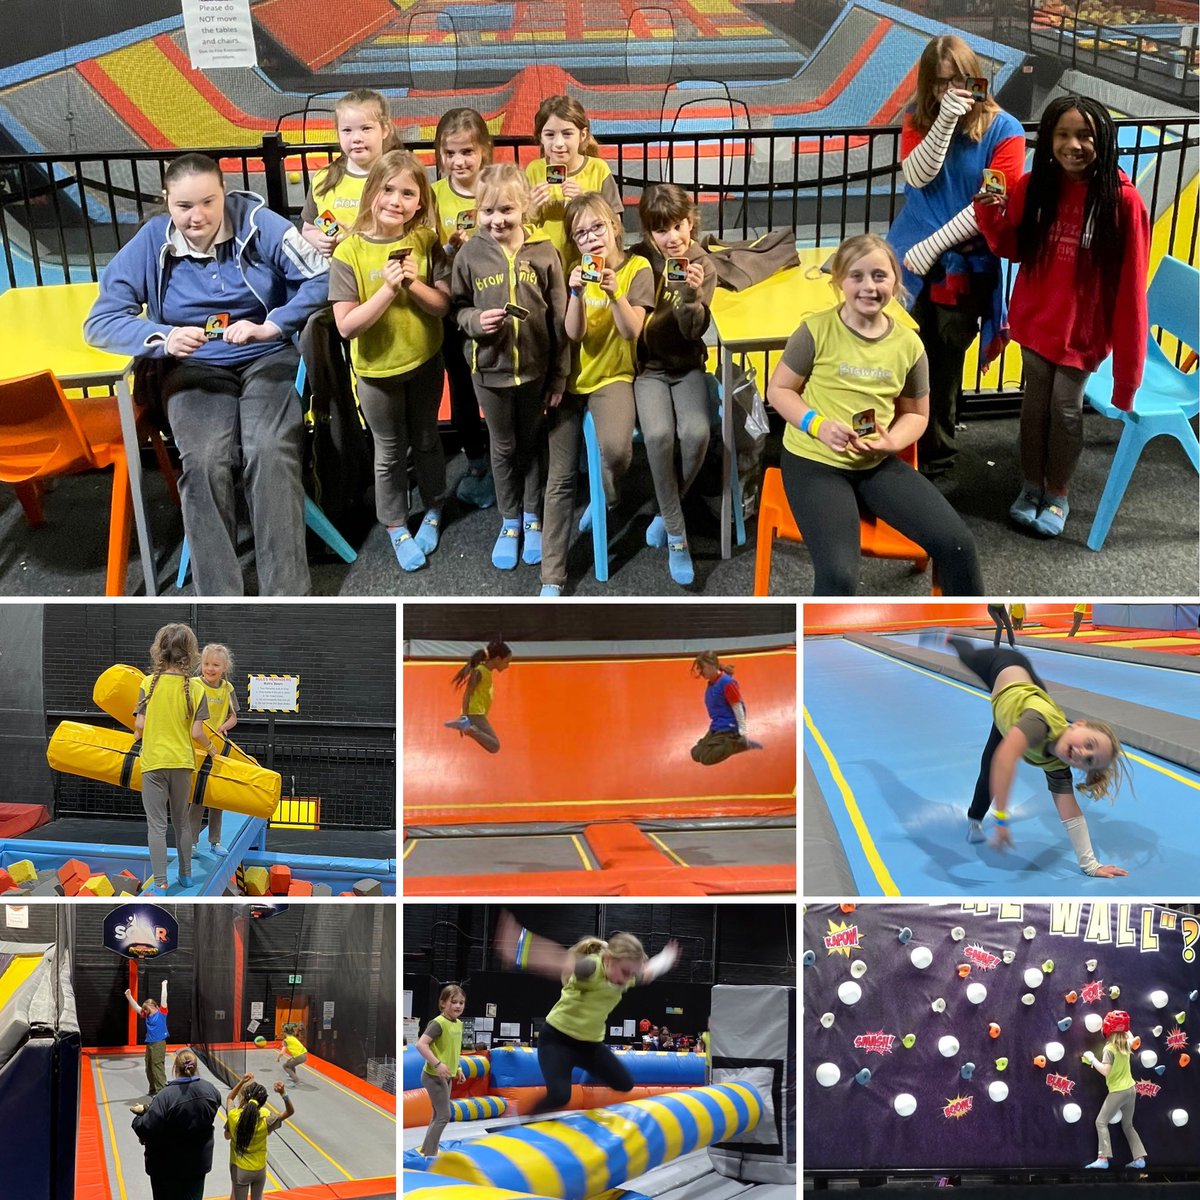 Taking the leap and aiming high, at the Soar trampoline park Brownies sleepover on International Women’s Day. #girlguiding #InternationalWomensDay #hernebay